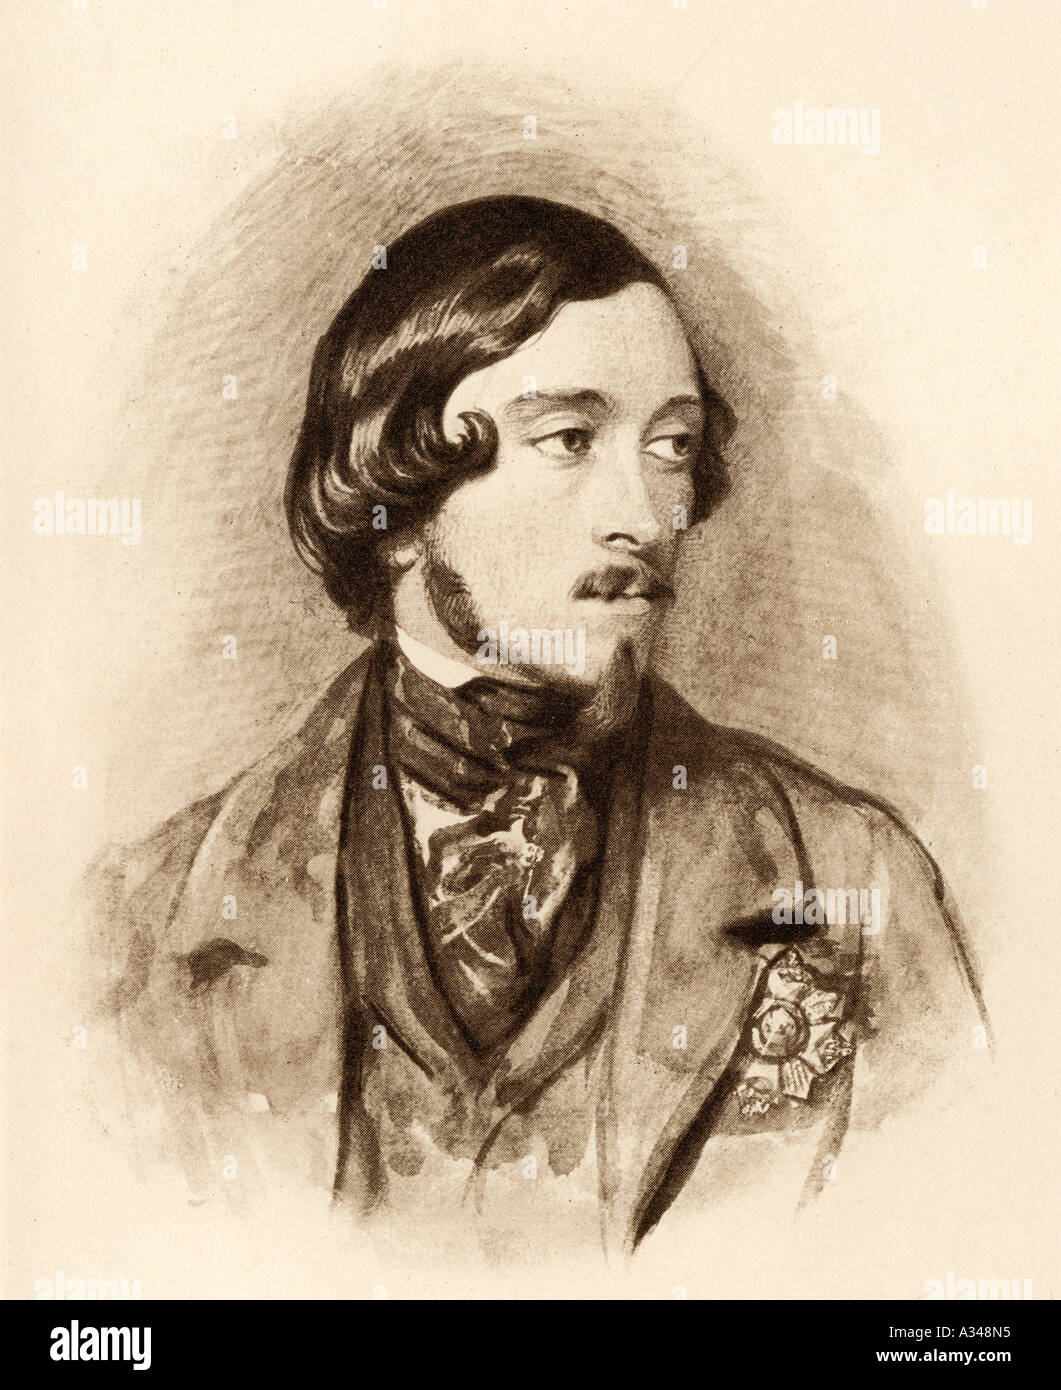 Ernest II, Duke of Saxe-Coburg and Gotha, 1818 - 1893. Brother of Prince Albert. Stock Photo